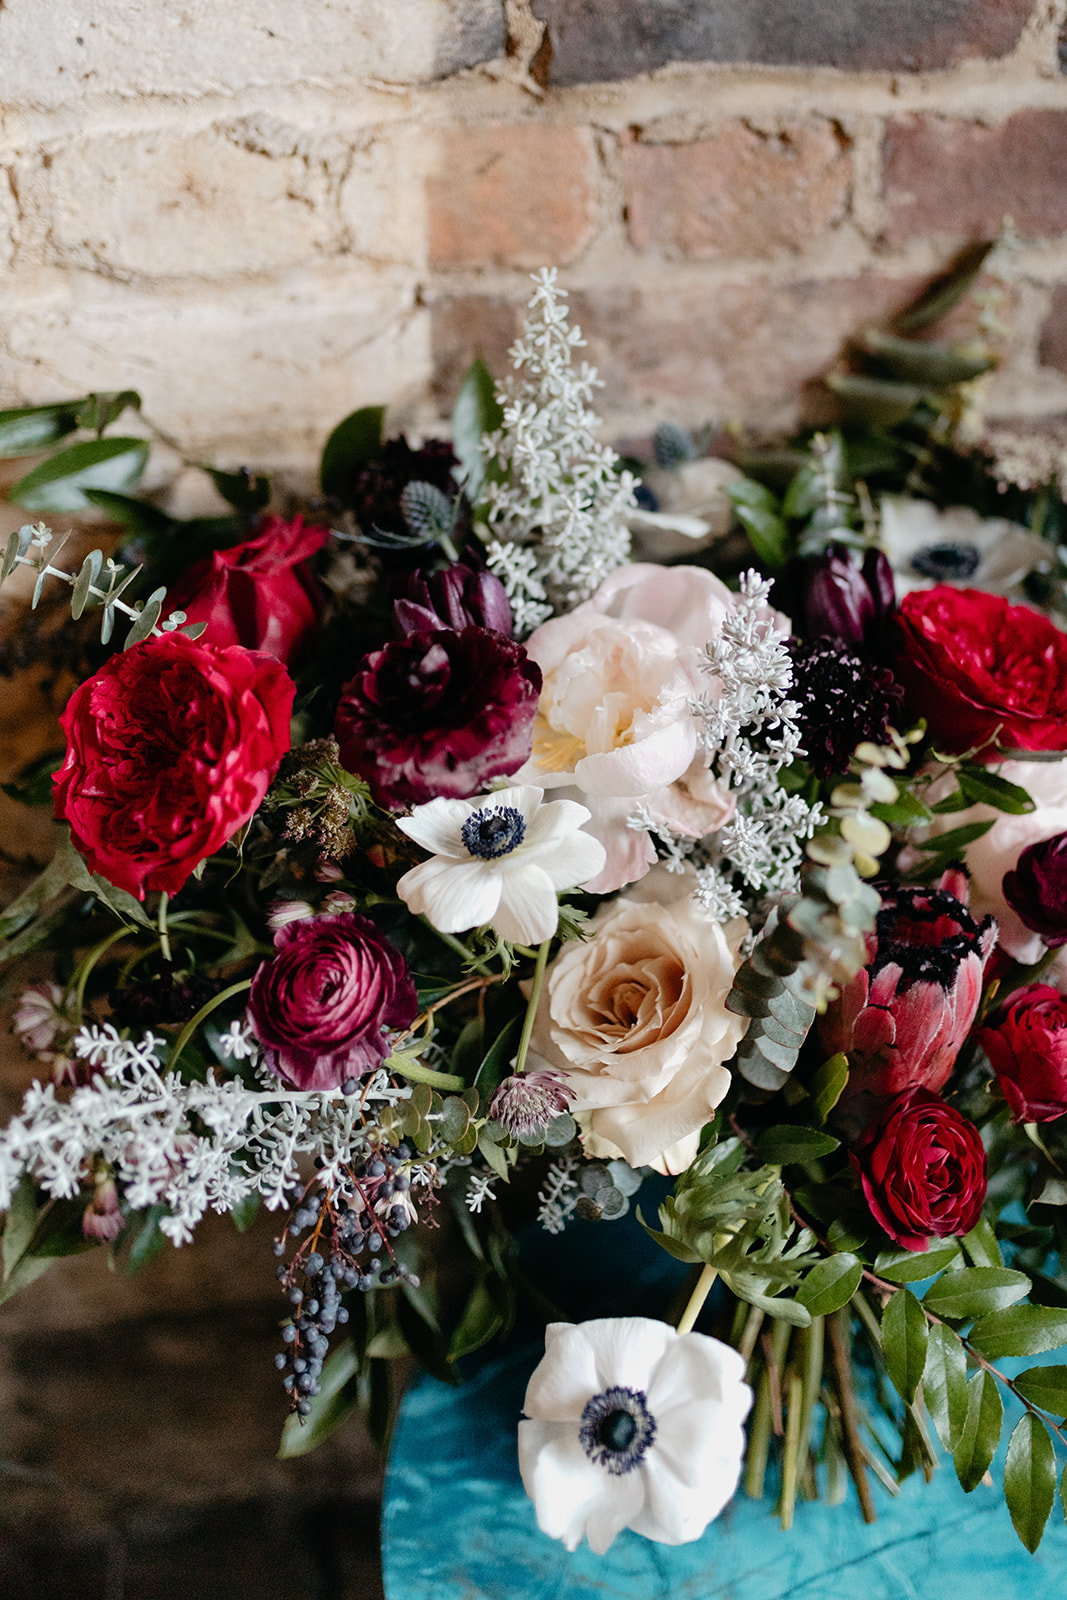 Lush, wintry bridal bouquet with garden roses, anemones, ranunculus, and greenery. Nashville Wedding Florist.